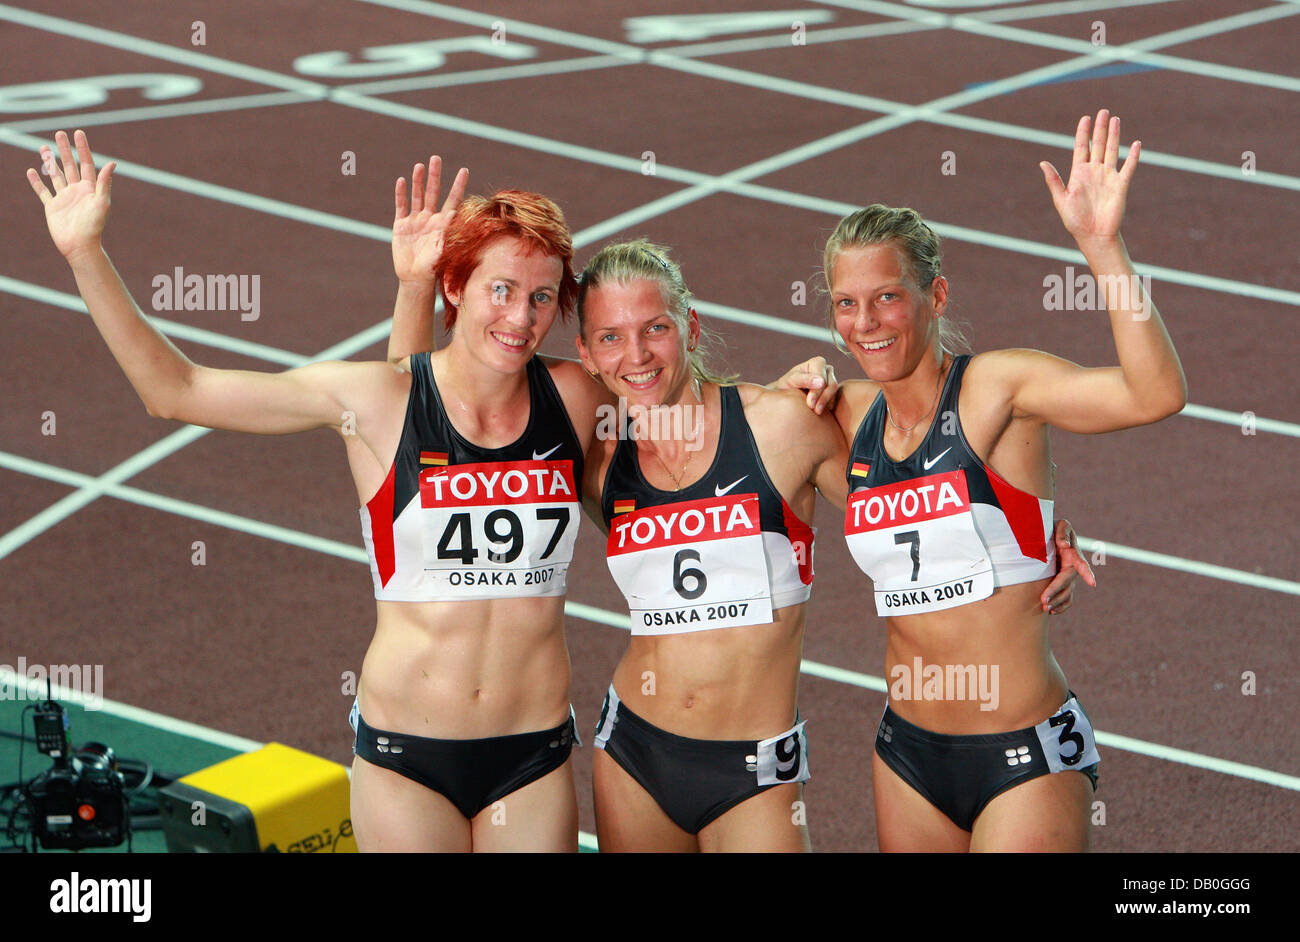 German heptathletes (L-R) Sonja Kesselschlaeger, Lilli Schwarzkopf and Jennifer Oeser wave to the spectators and cameramen after the heptathlton competition at the IAAF Athletics World Championships at Nagai stadium in Osaka, Japan, 26 August 2007. Schwarzkopf finished fifth, Oeser seventh and Kesselschlaeger 13th. Photo: Gero Breloer Stock Photo